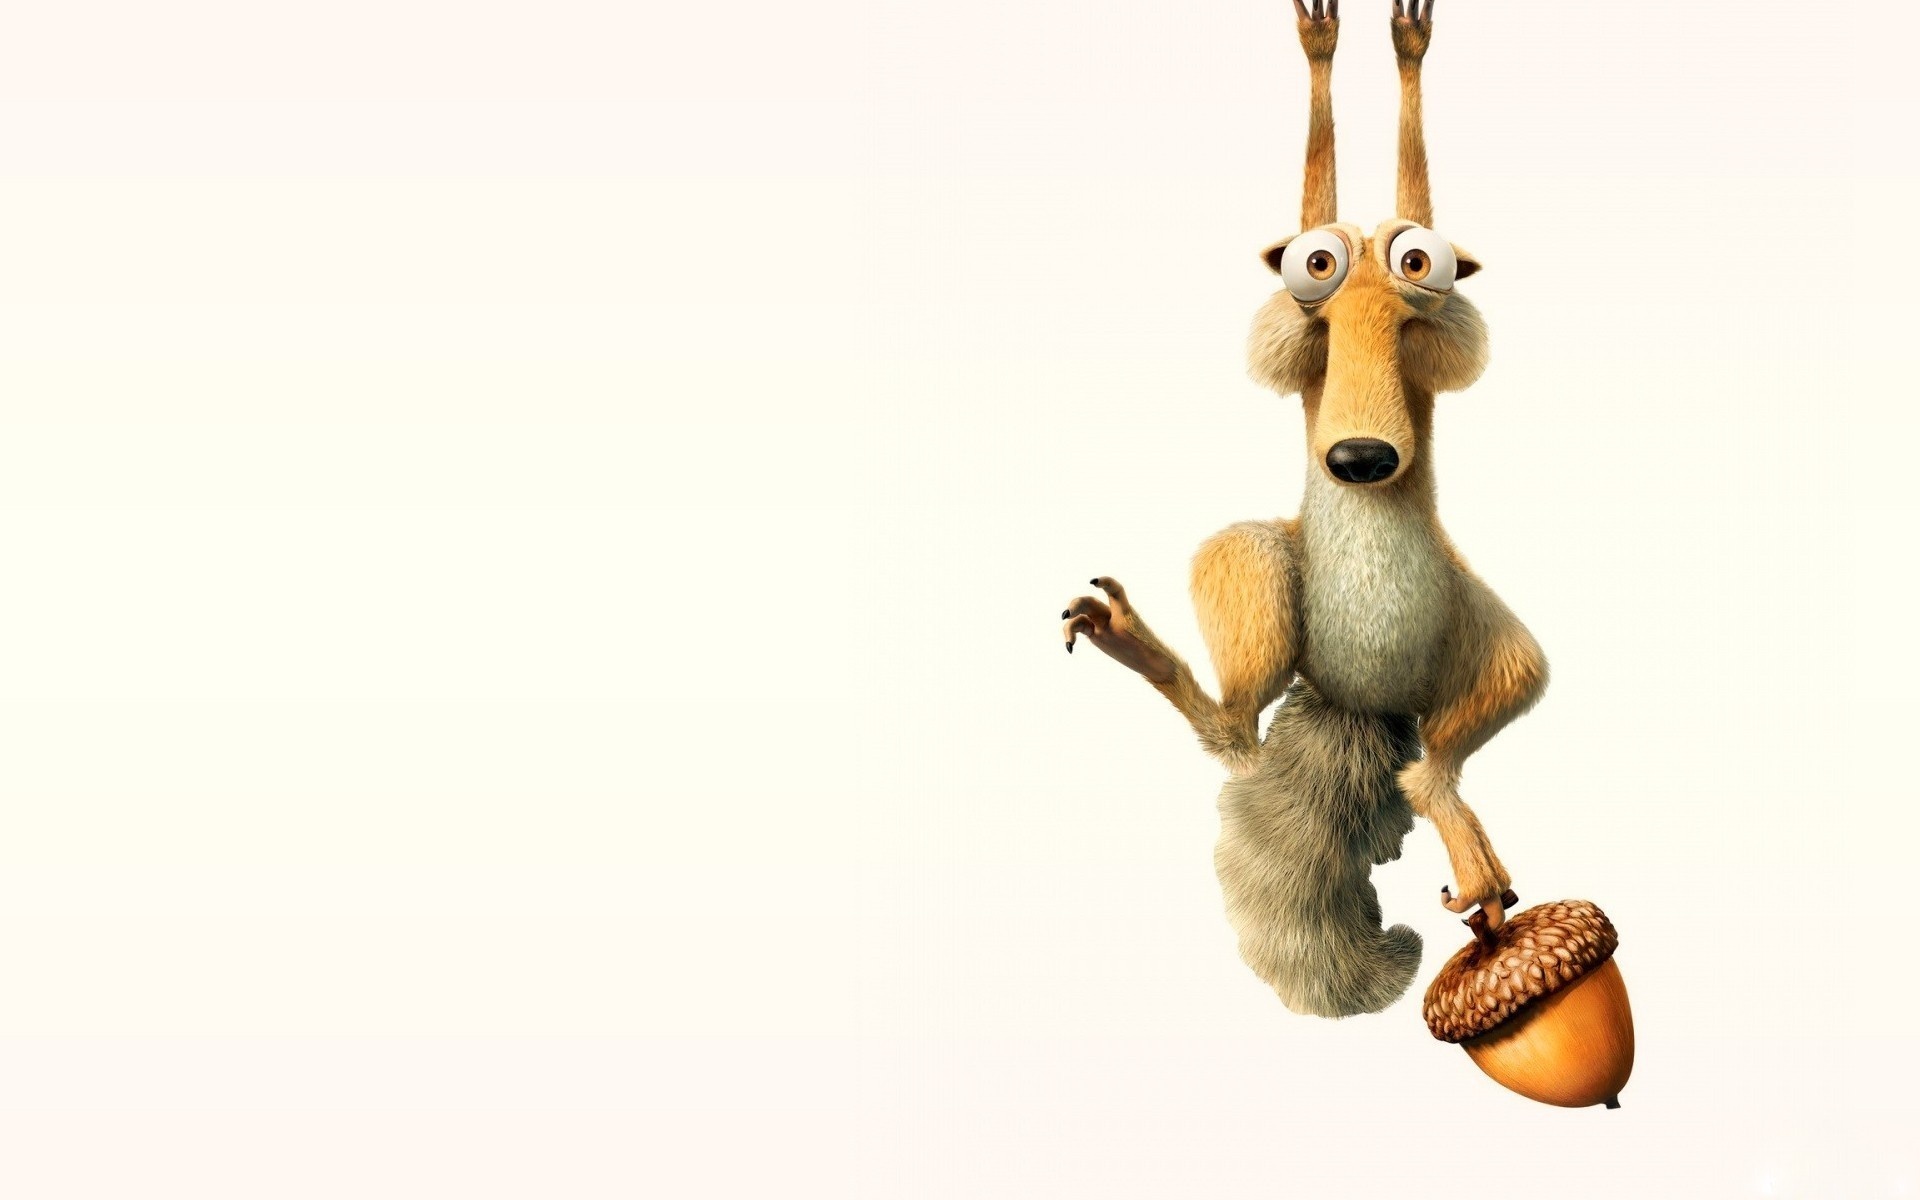 Ice Age Cartoon Wallpapers 18   Wallpapers Mela 1920x1200